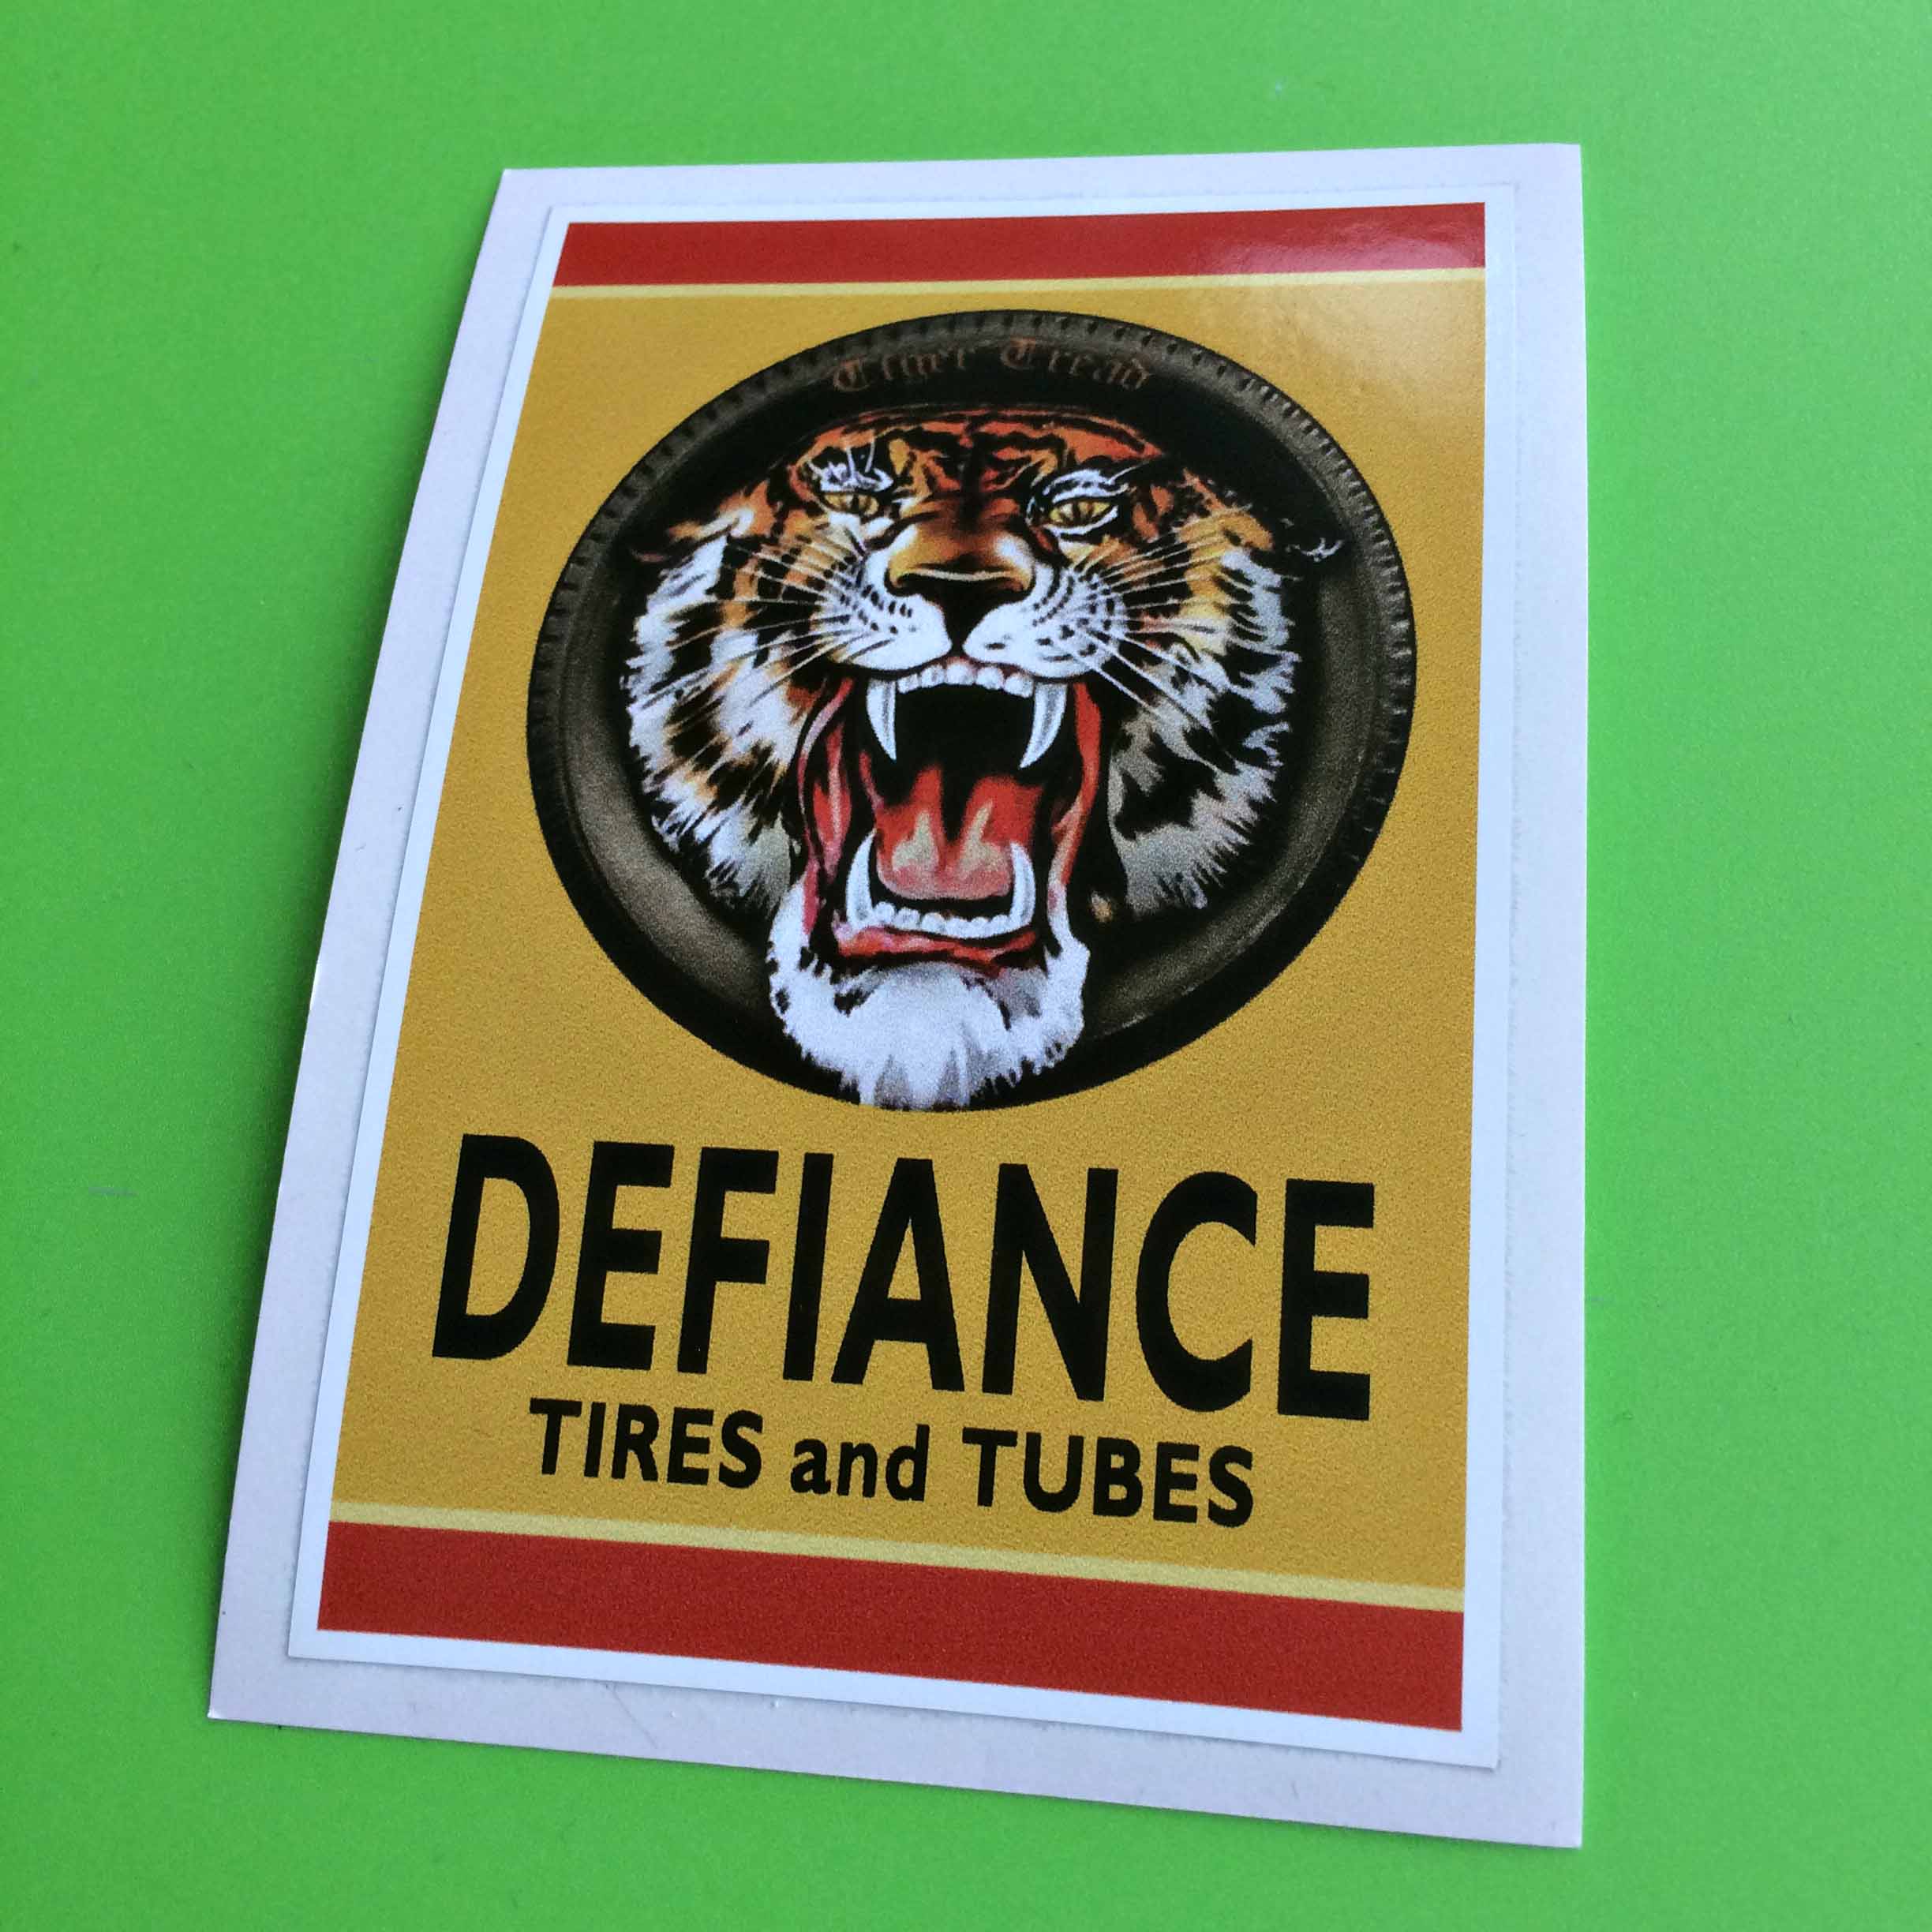 DEFIANCE TIRES AND TUBES STICKER. Defiance Tires and Tubes in black uppercase lettering on a yellow sticker with the top and bottom edges in red. A tiger's head with mouth wide open displaying a red tongue and sharp fangs sits inside a tyre.